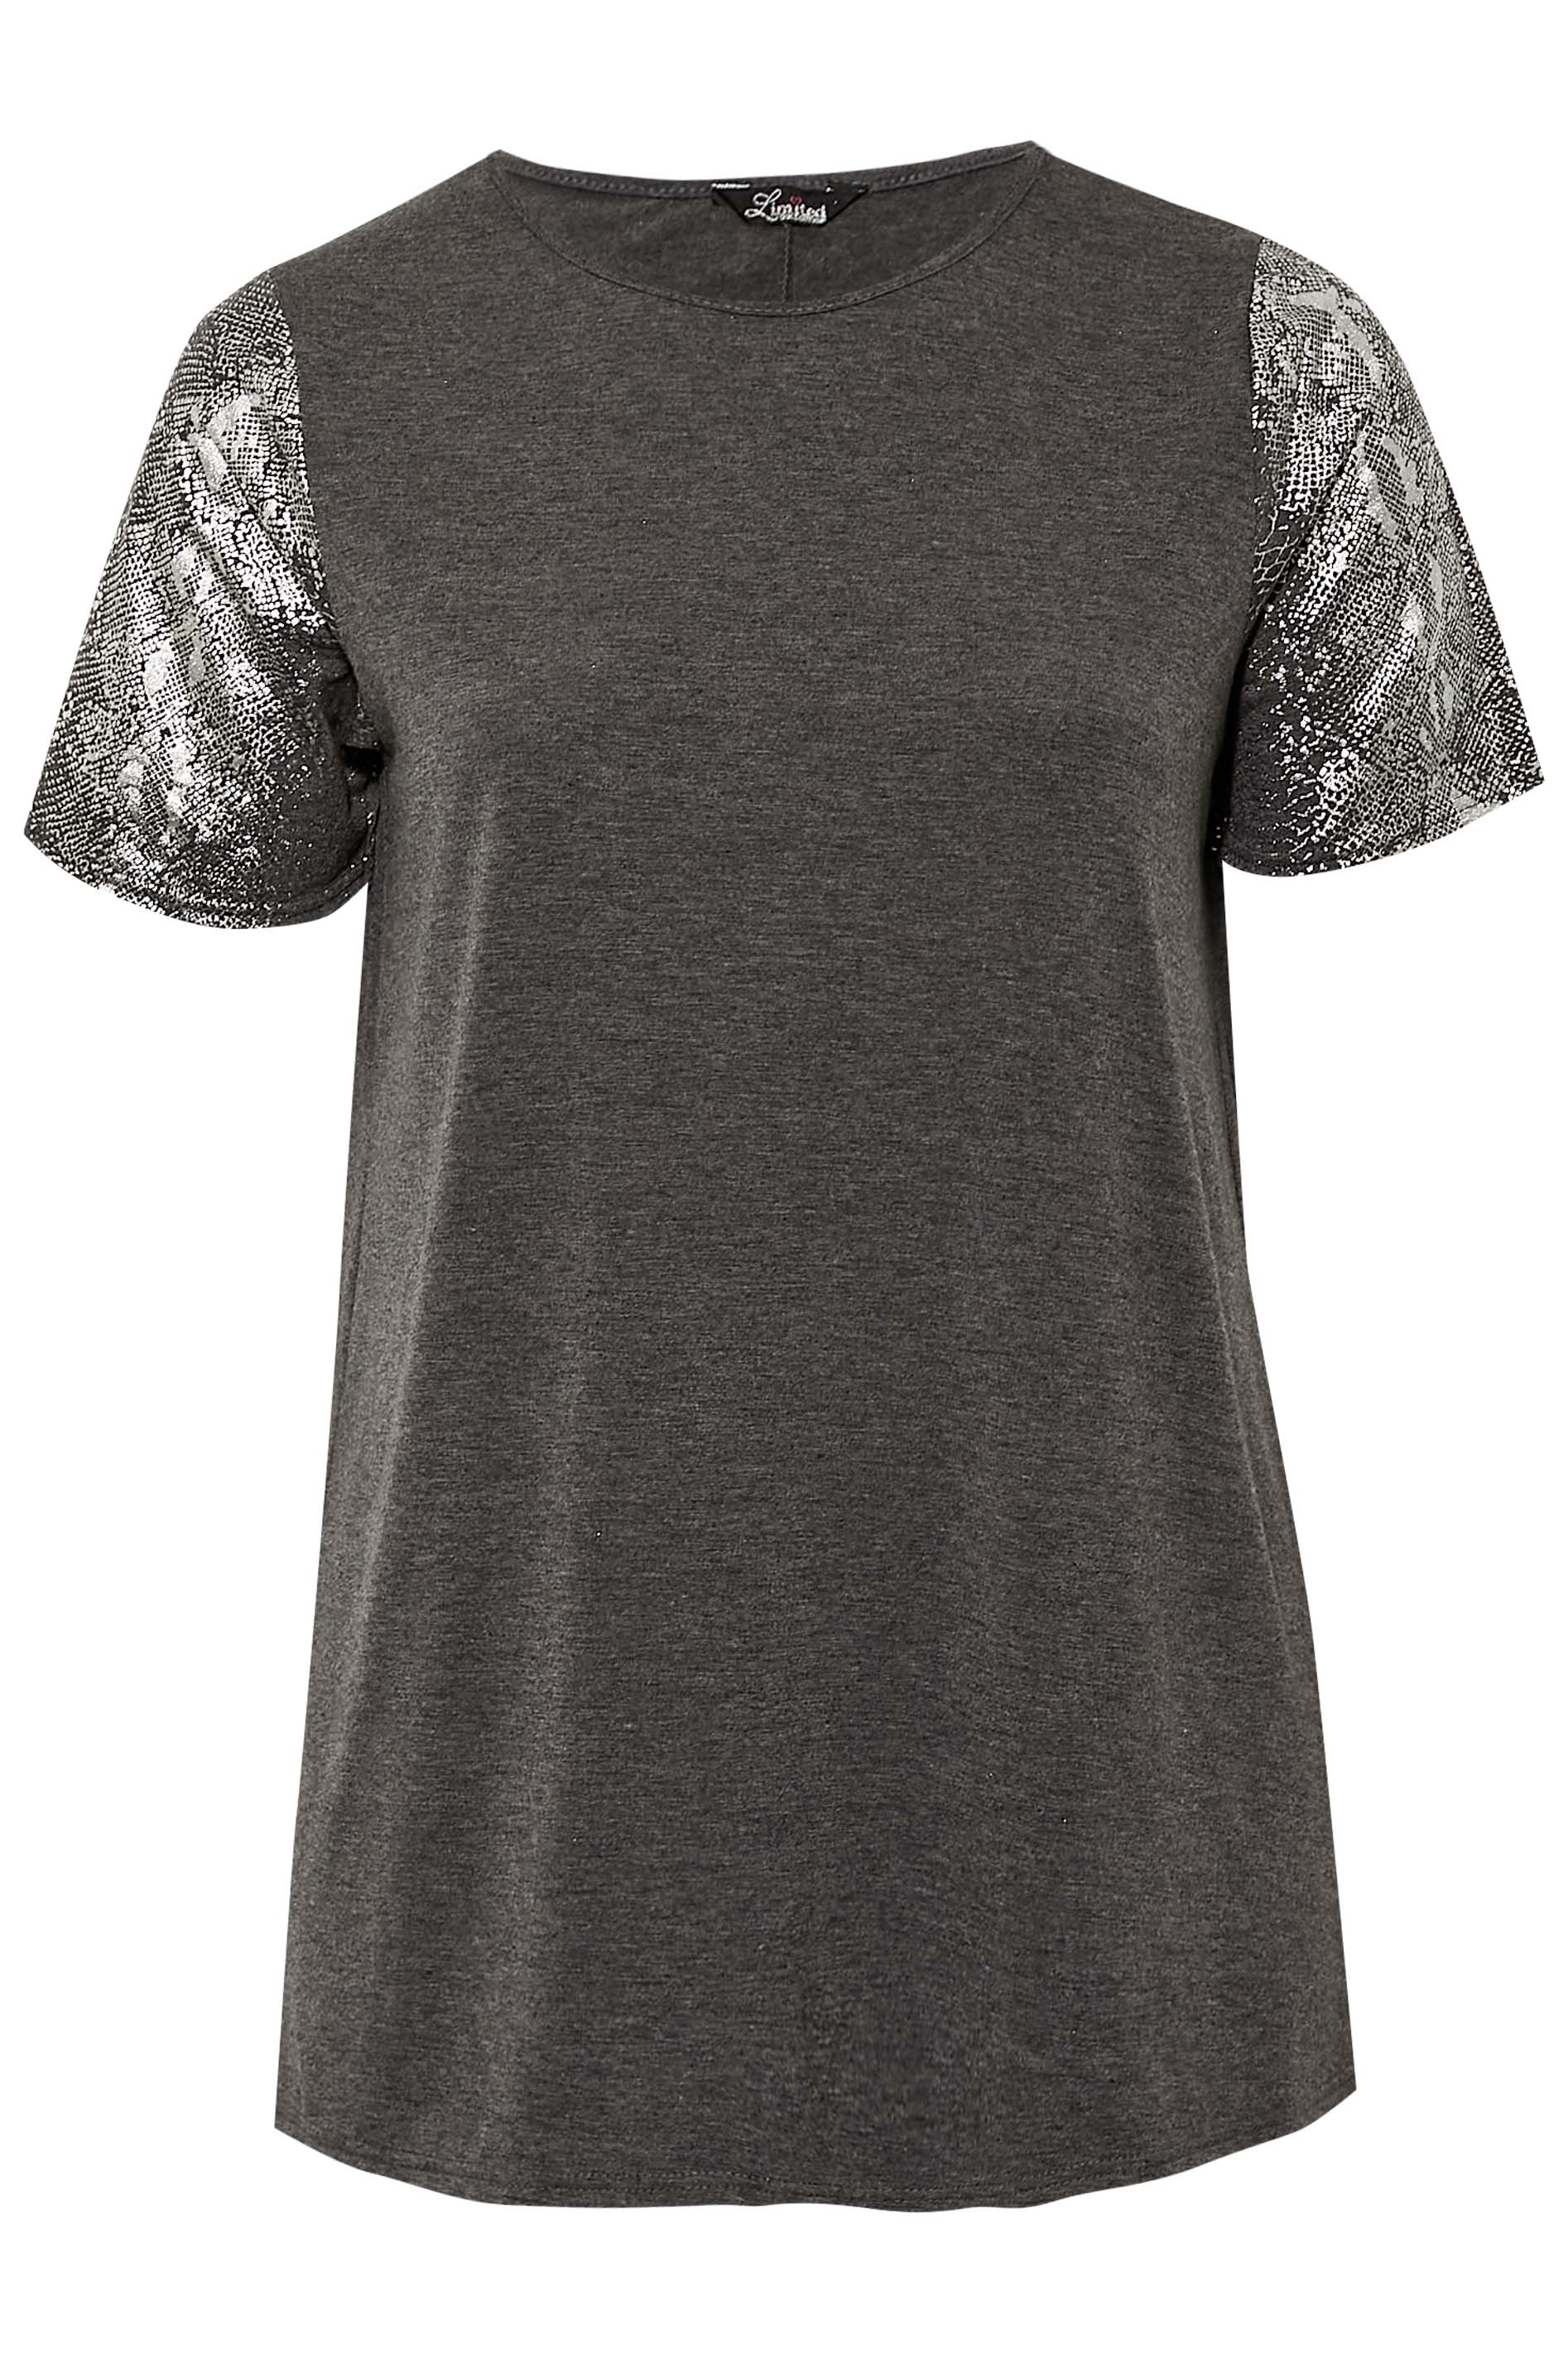 LIMITED COLLECTION Curve Grey Snake Print Sleeve T-Shirt 1